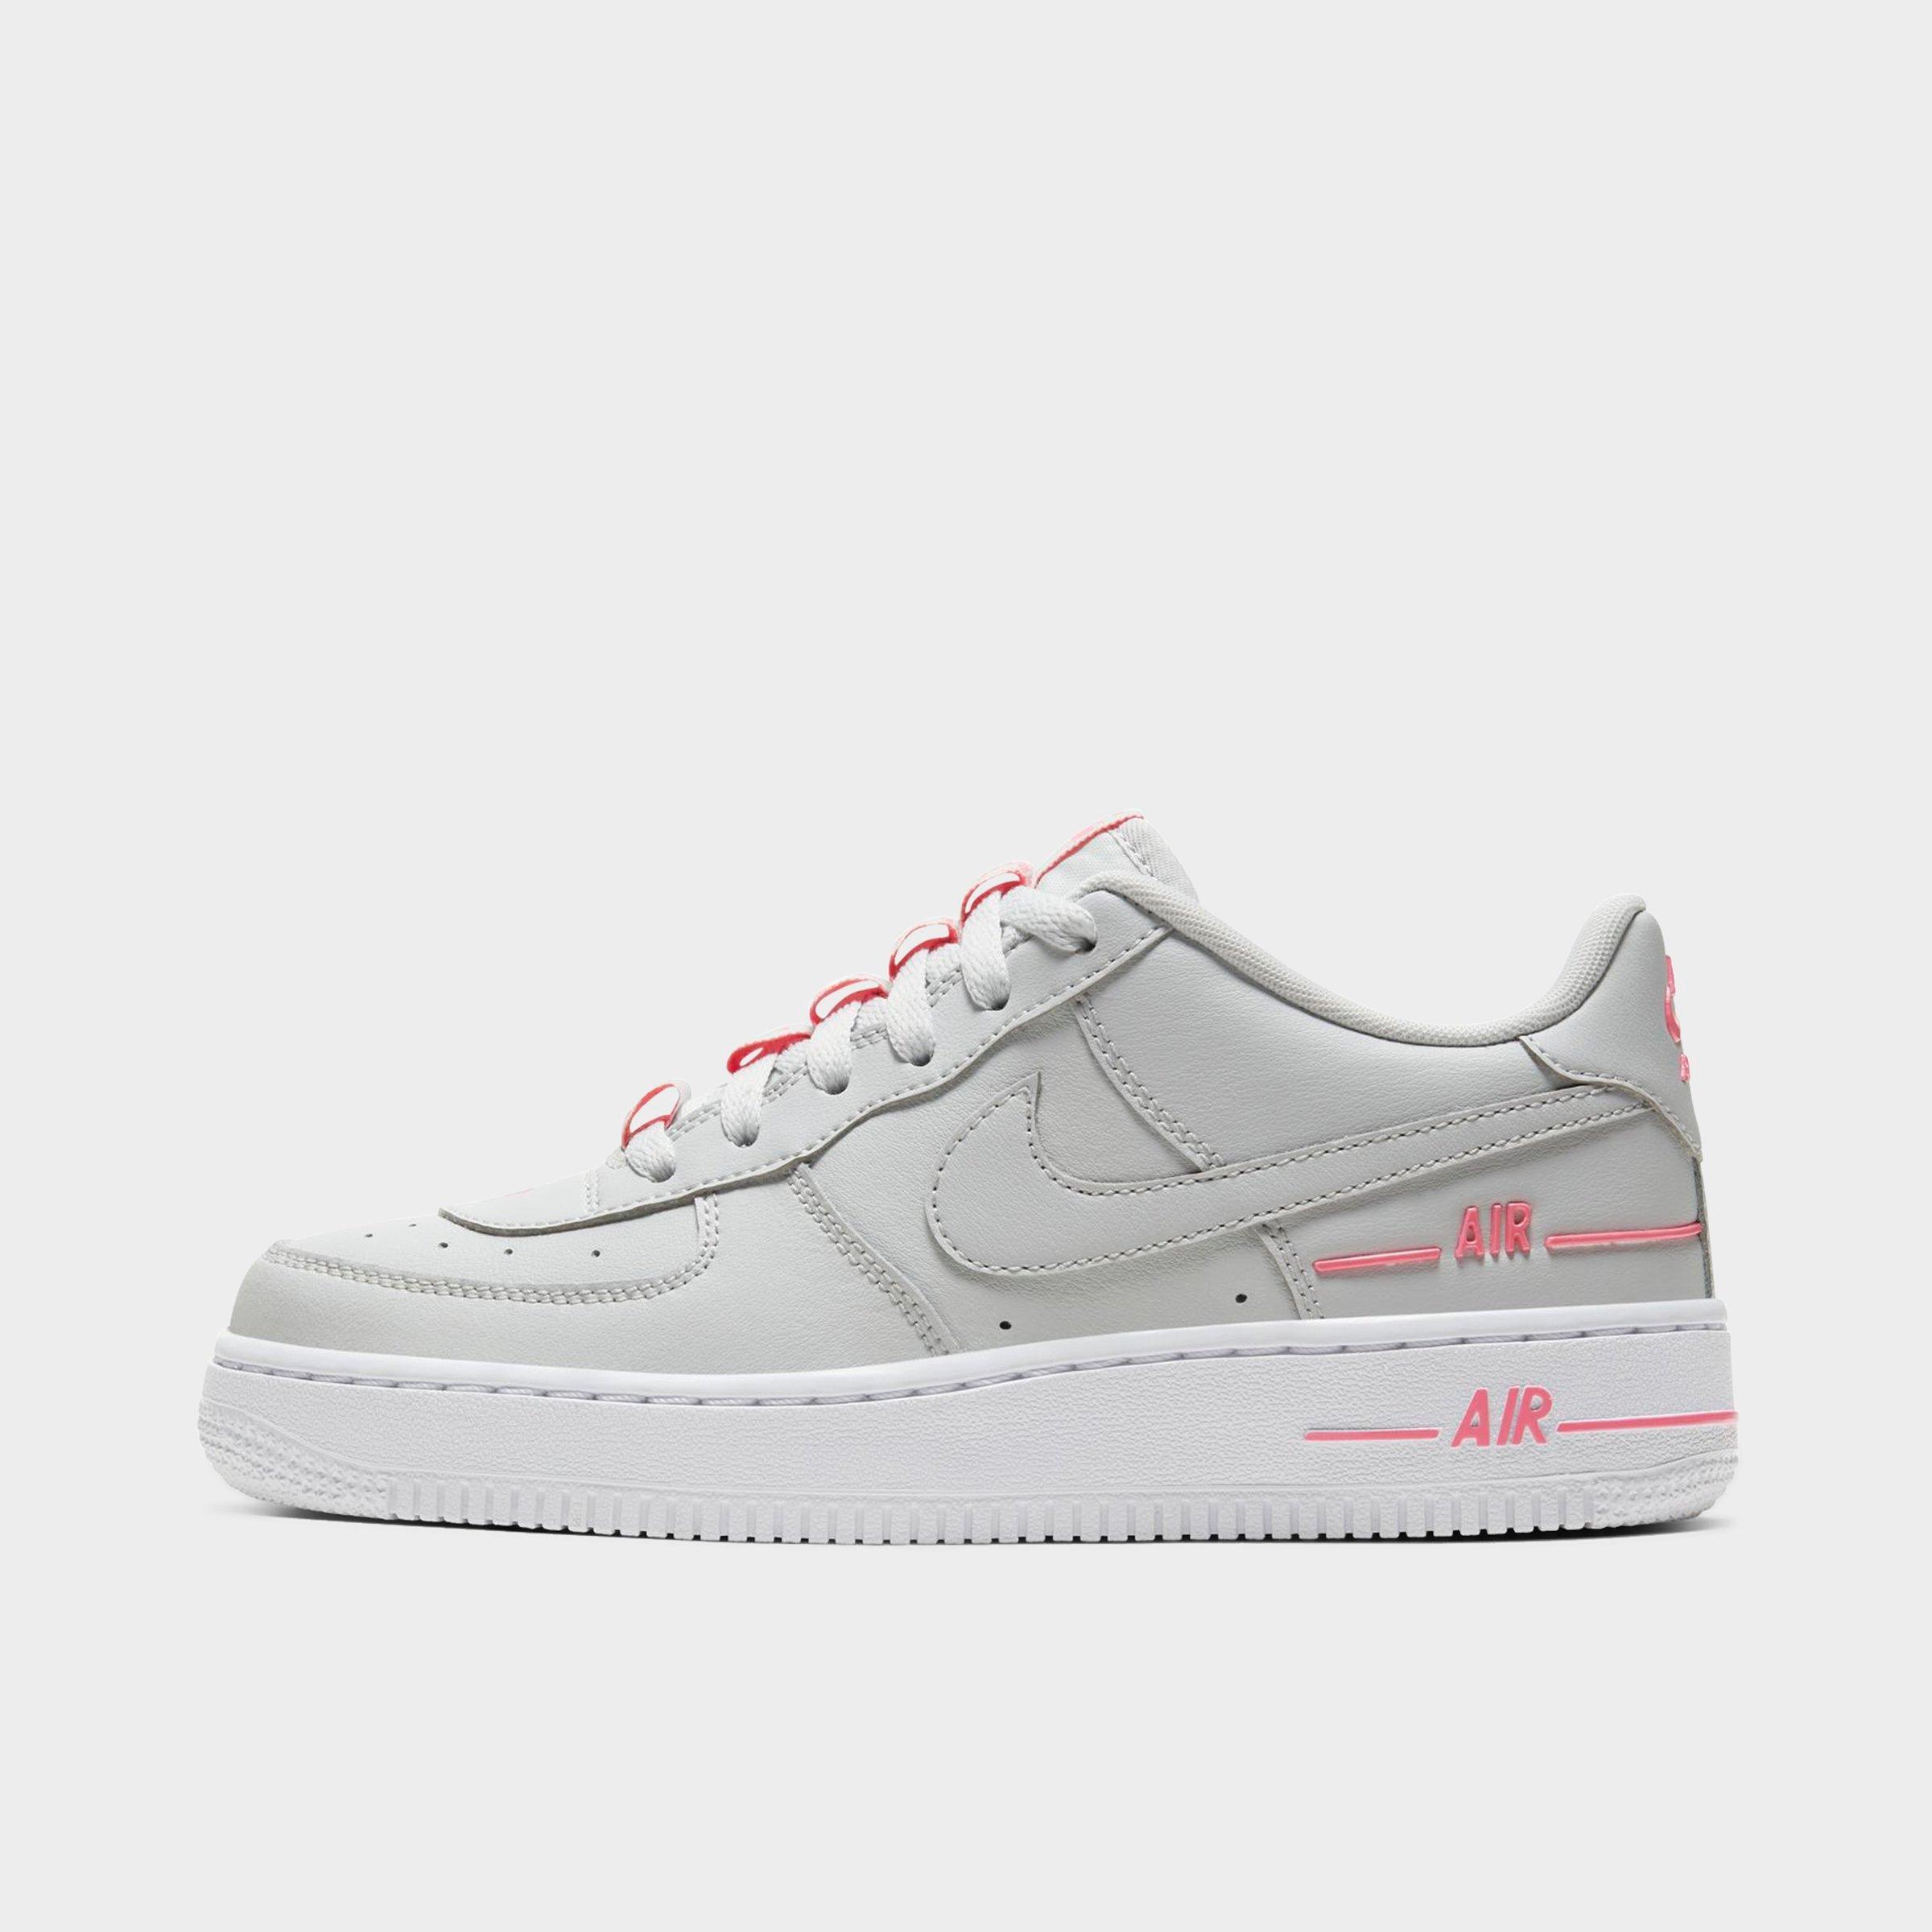 academy sports nike air force 1